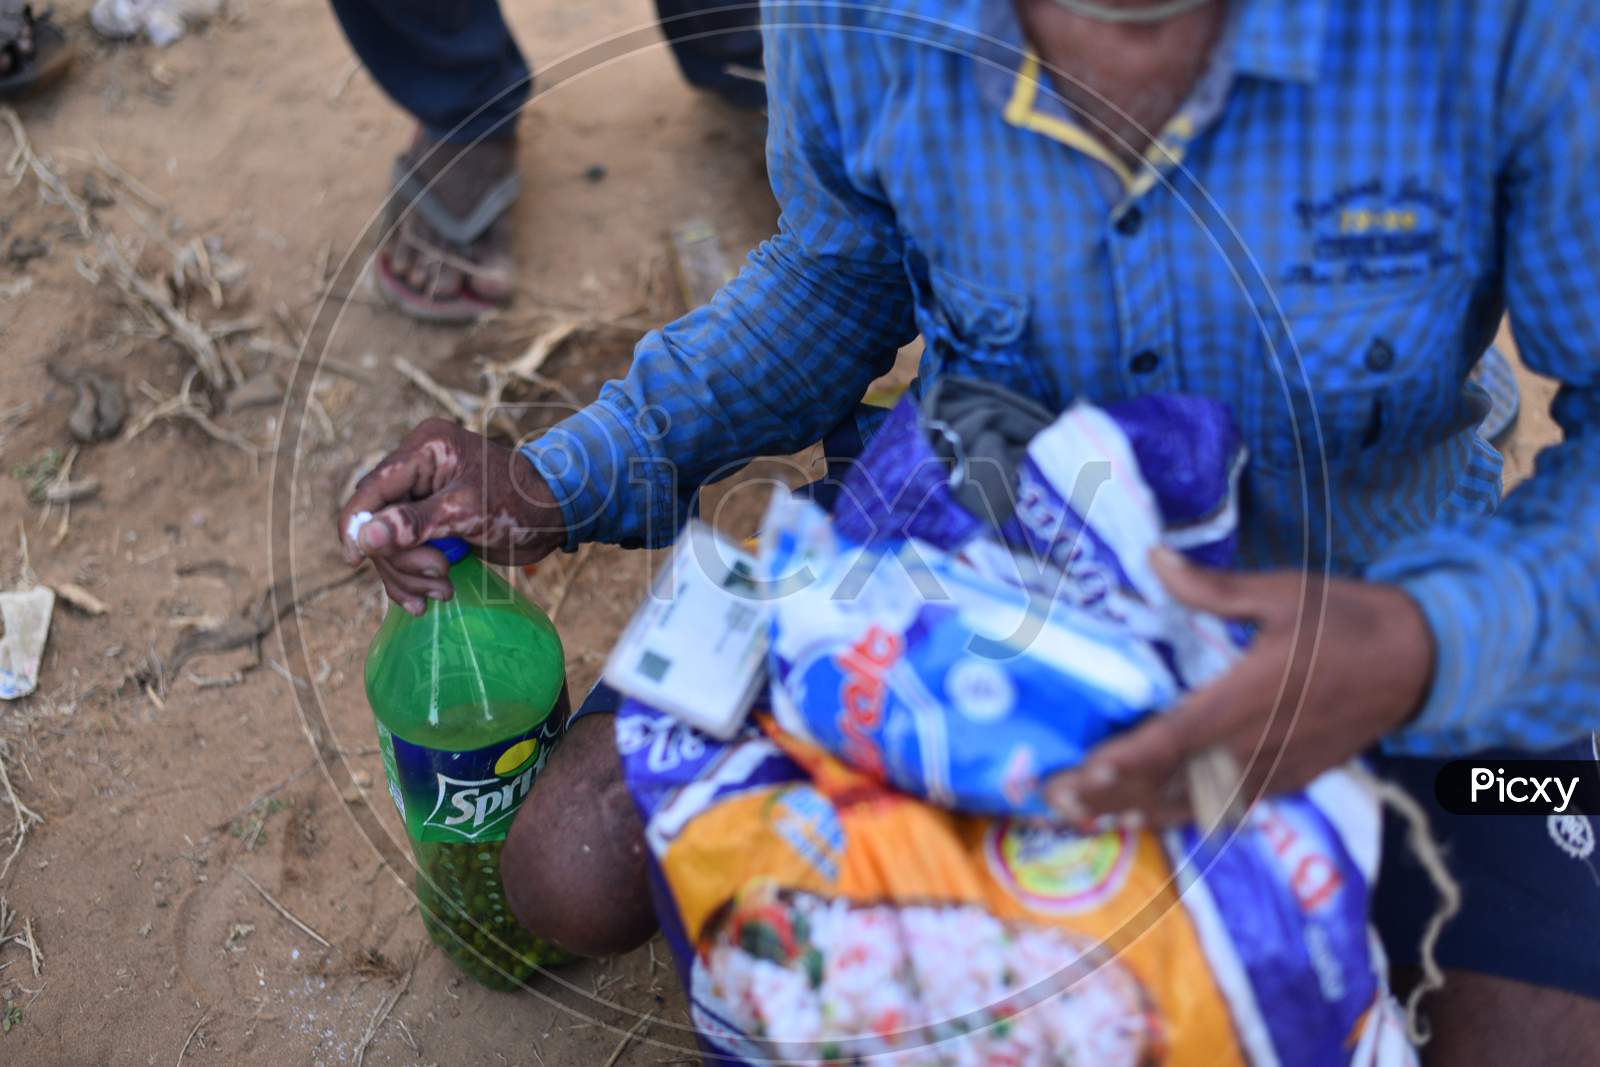 Migrant workers from Bihar eat (Black Gram) Chana as they wait at the Telangana-Andhra Pradesh Border to get permission to cross the border, Aswaraopet, May 16,2020